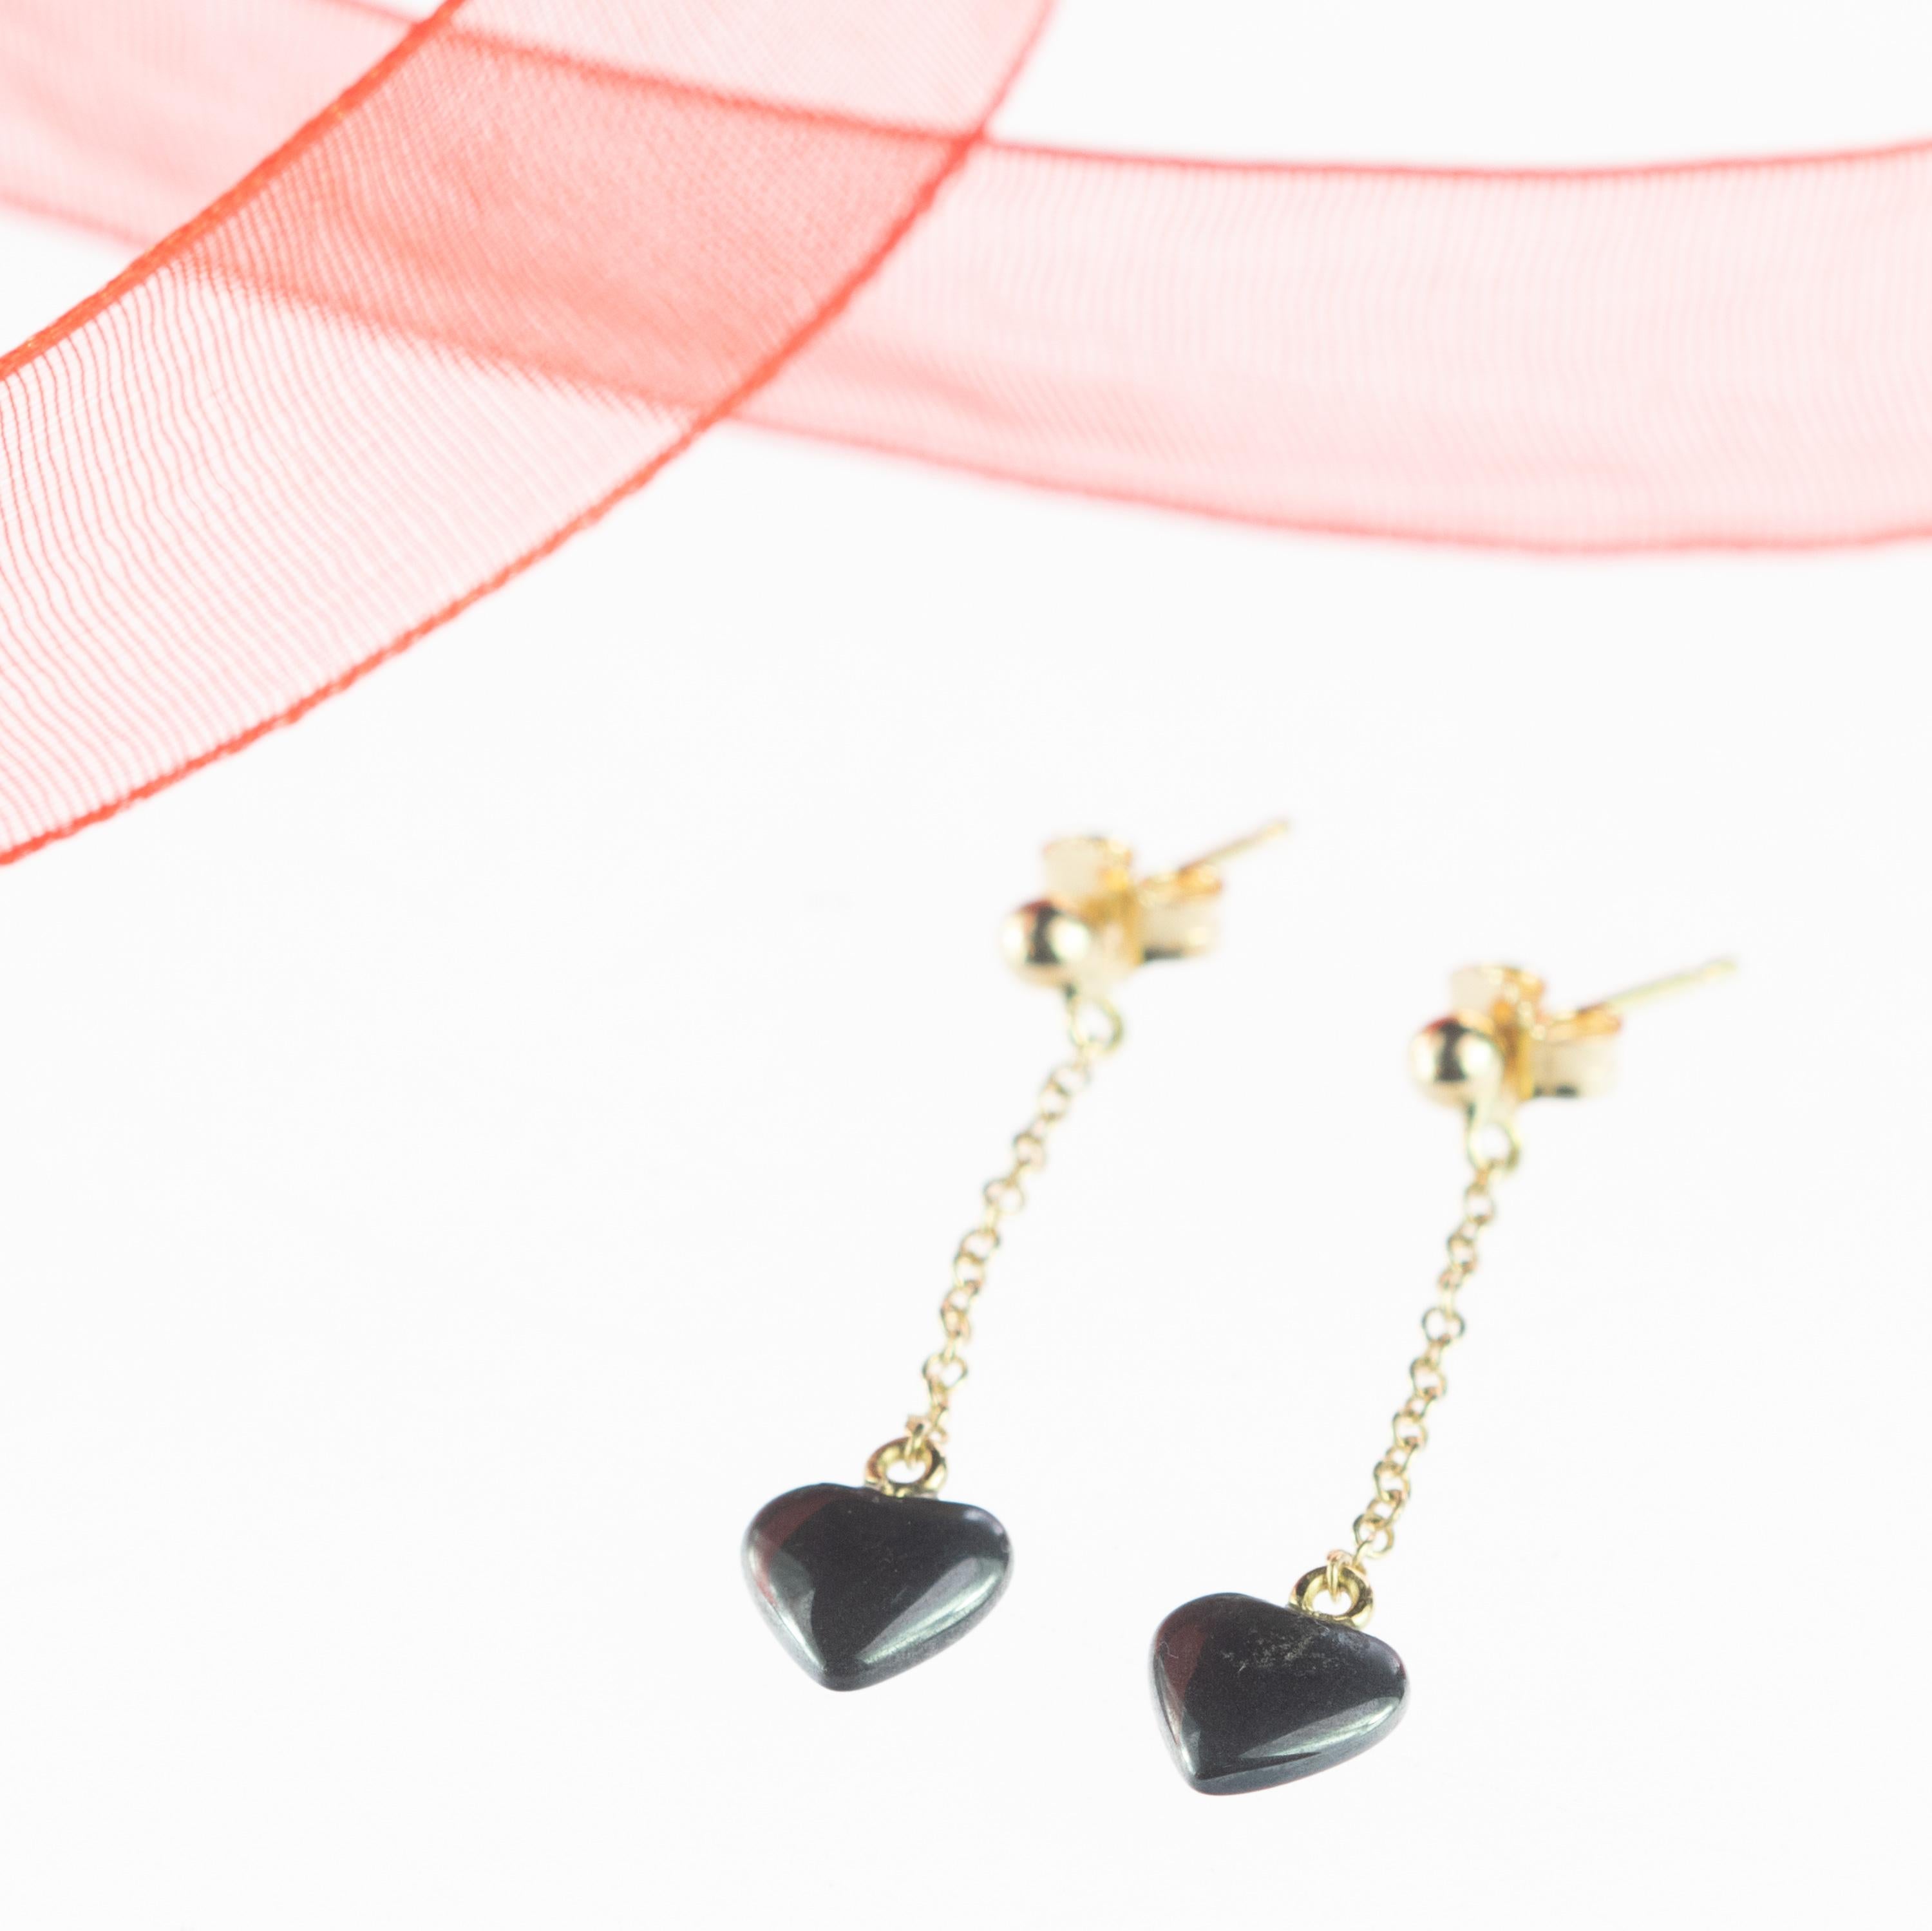 valentines day earrings